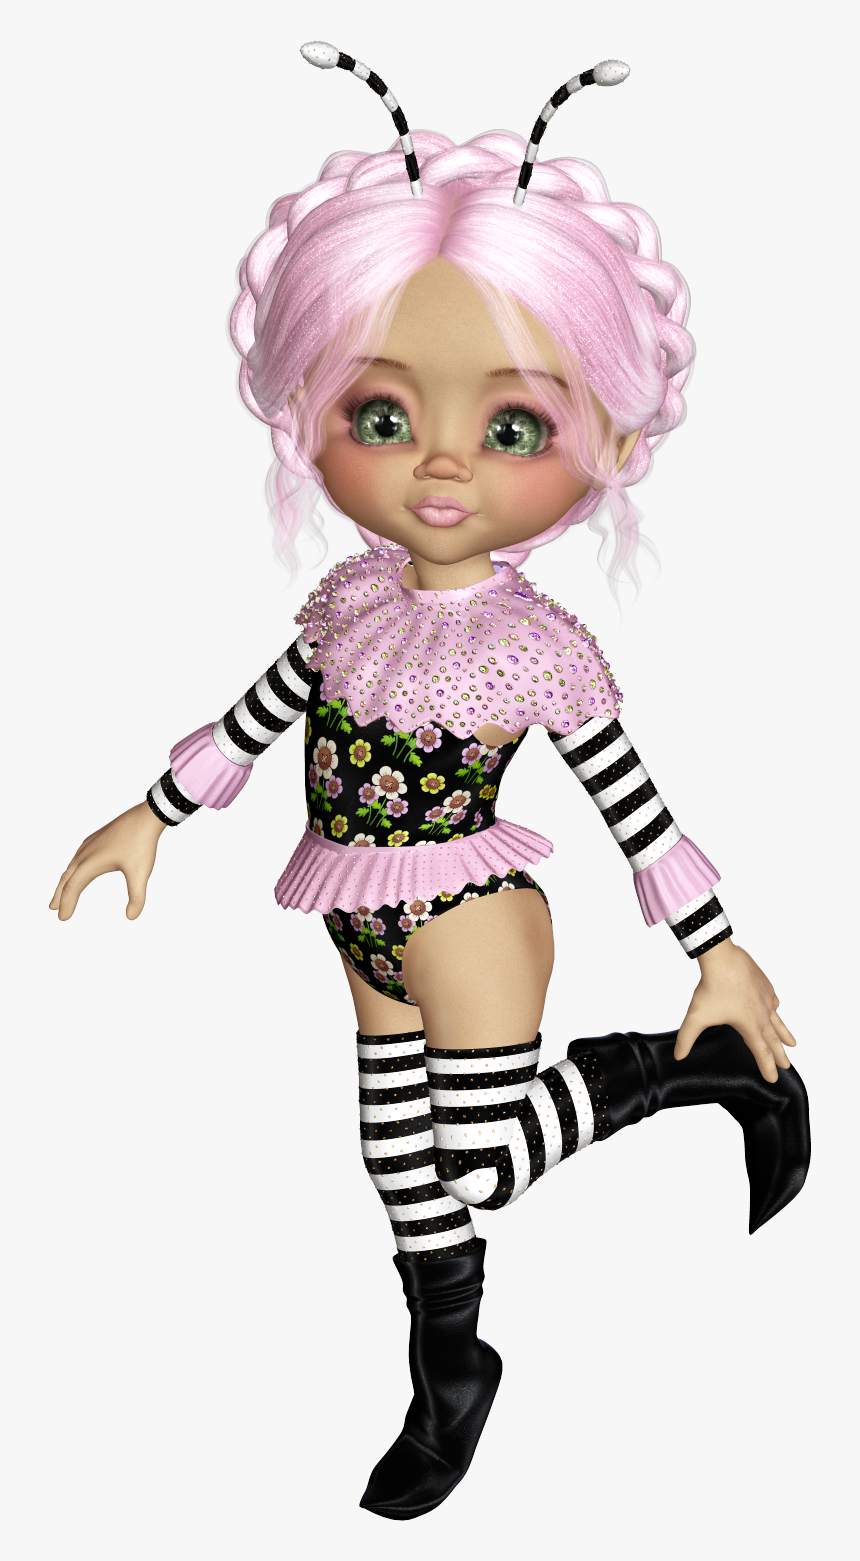 ╰⊰✿gs✿⊱╮ Girl Clipart, Elf Doll, Cute Fairy,, HD Png Download, Free Download